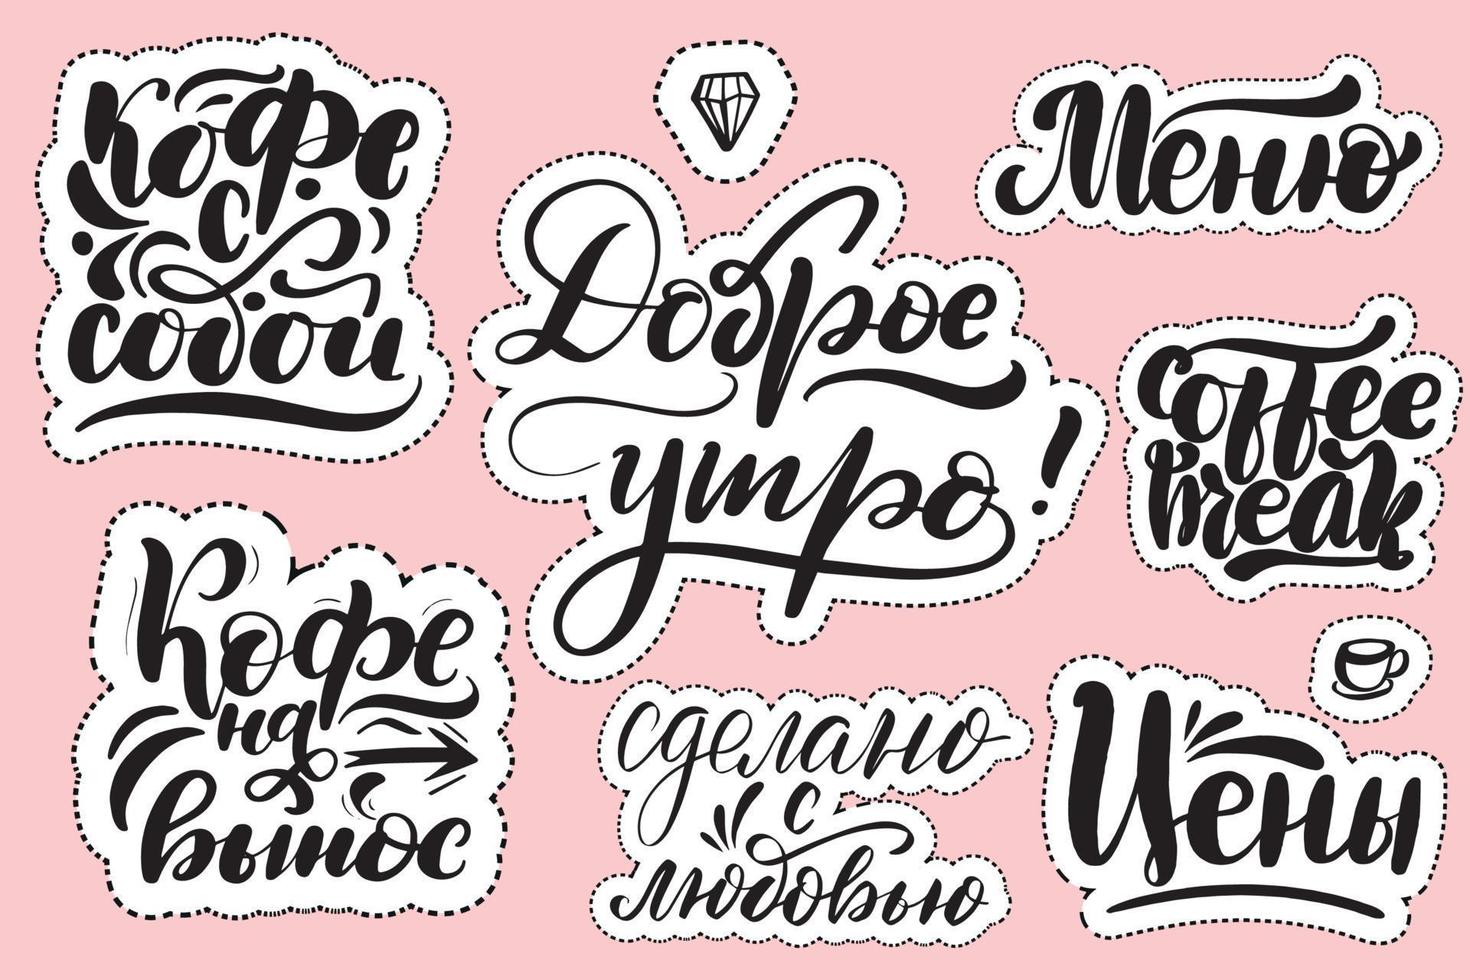 Set of handwritten lettering labels. Stickers with Russian typography inscriptions about coffee. Vector stock calligraphy illustrations for handmade and scrapbooking, diaries, cards, social media.